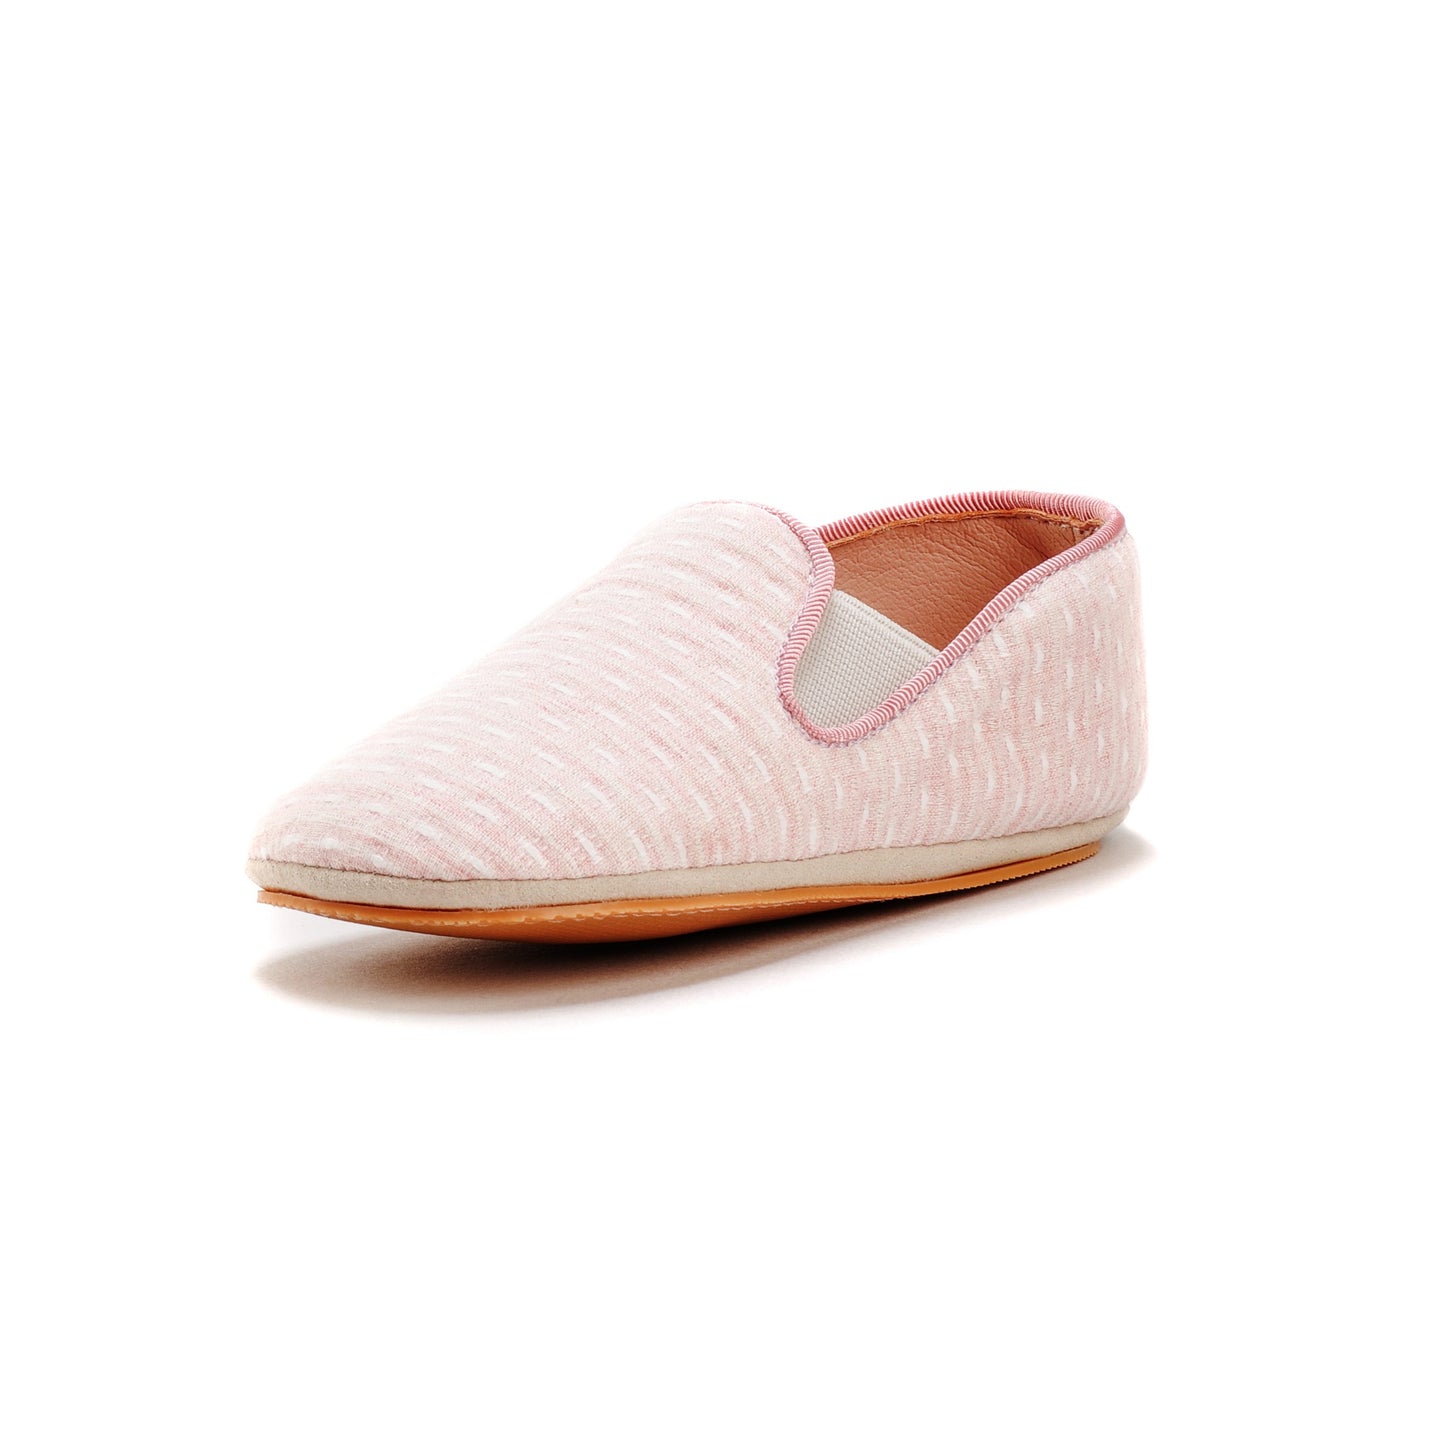 The Pale Pink Pull-On Slipper